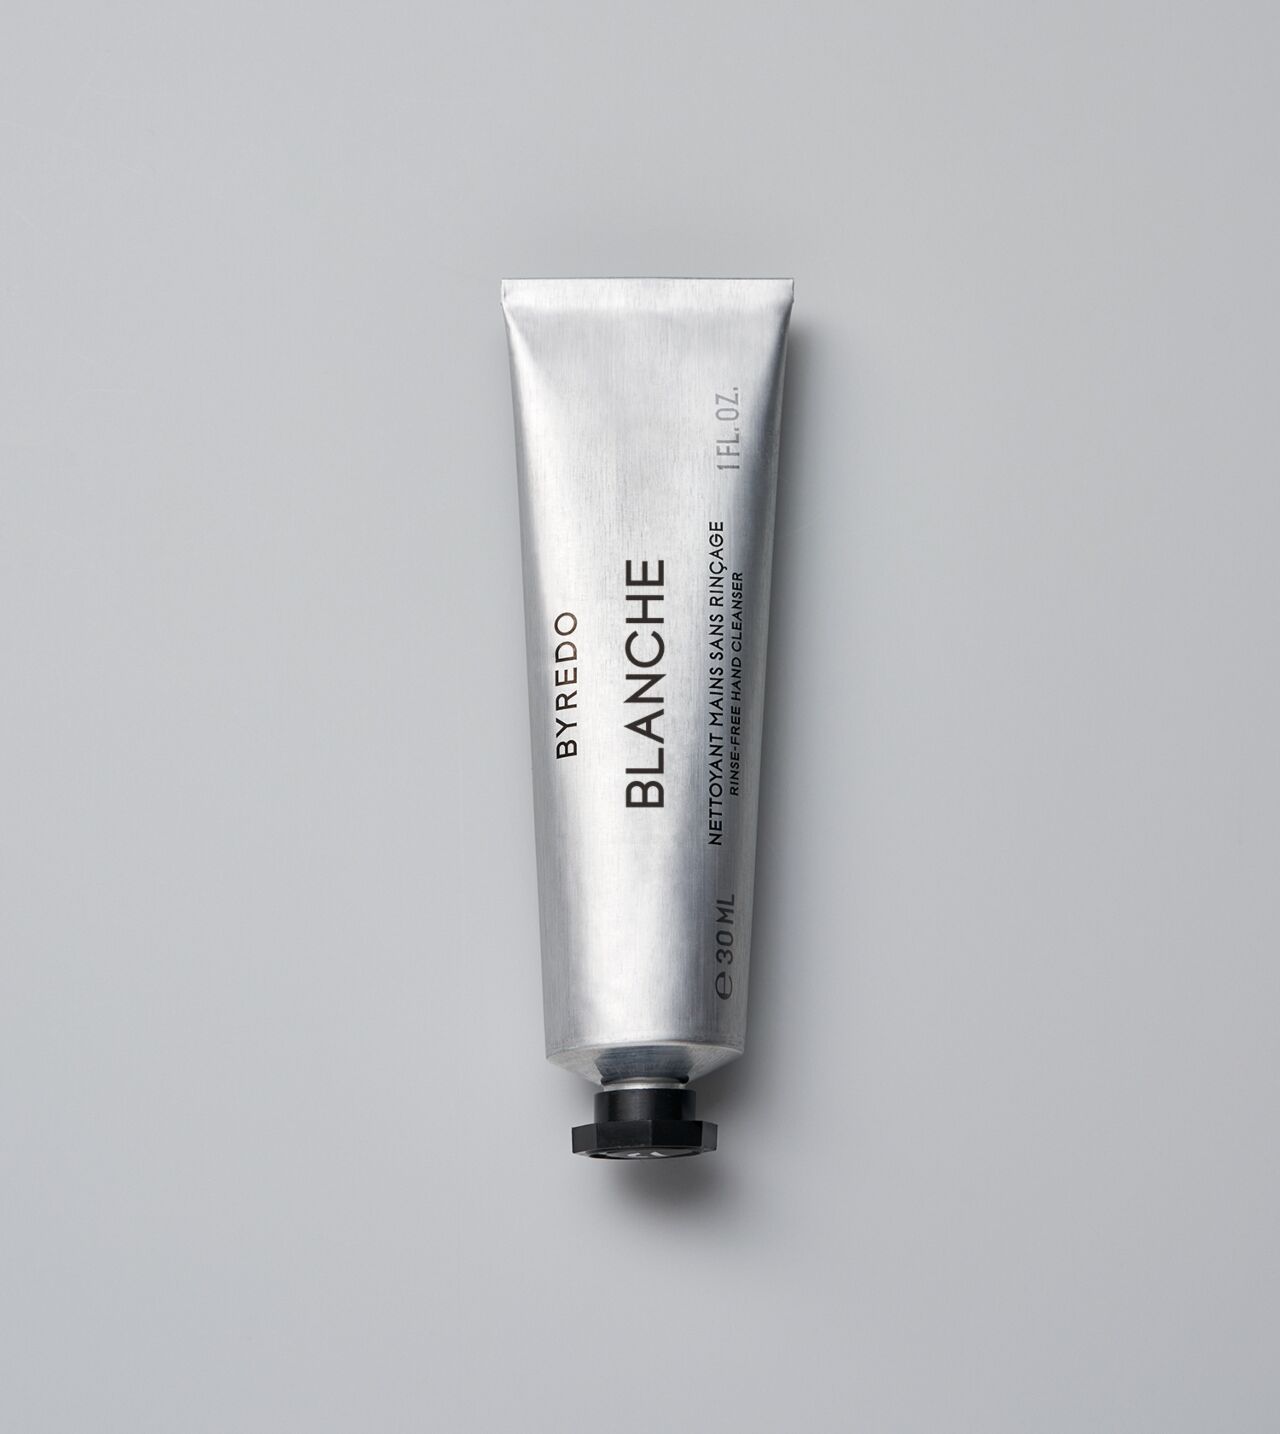 Blance Rinse Free Hand Cleanser